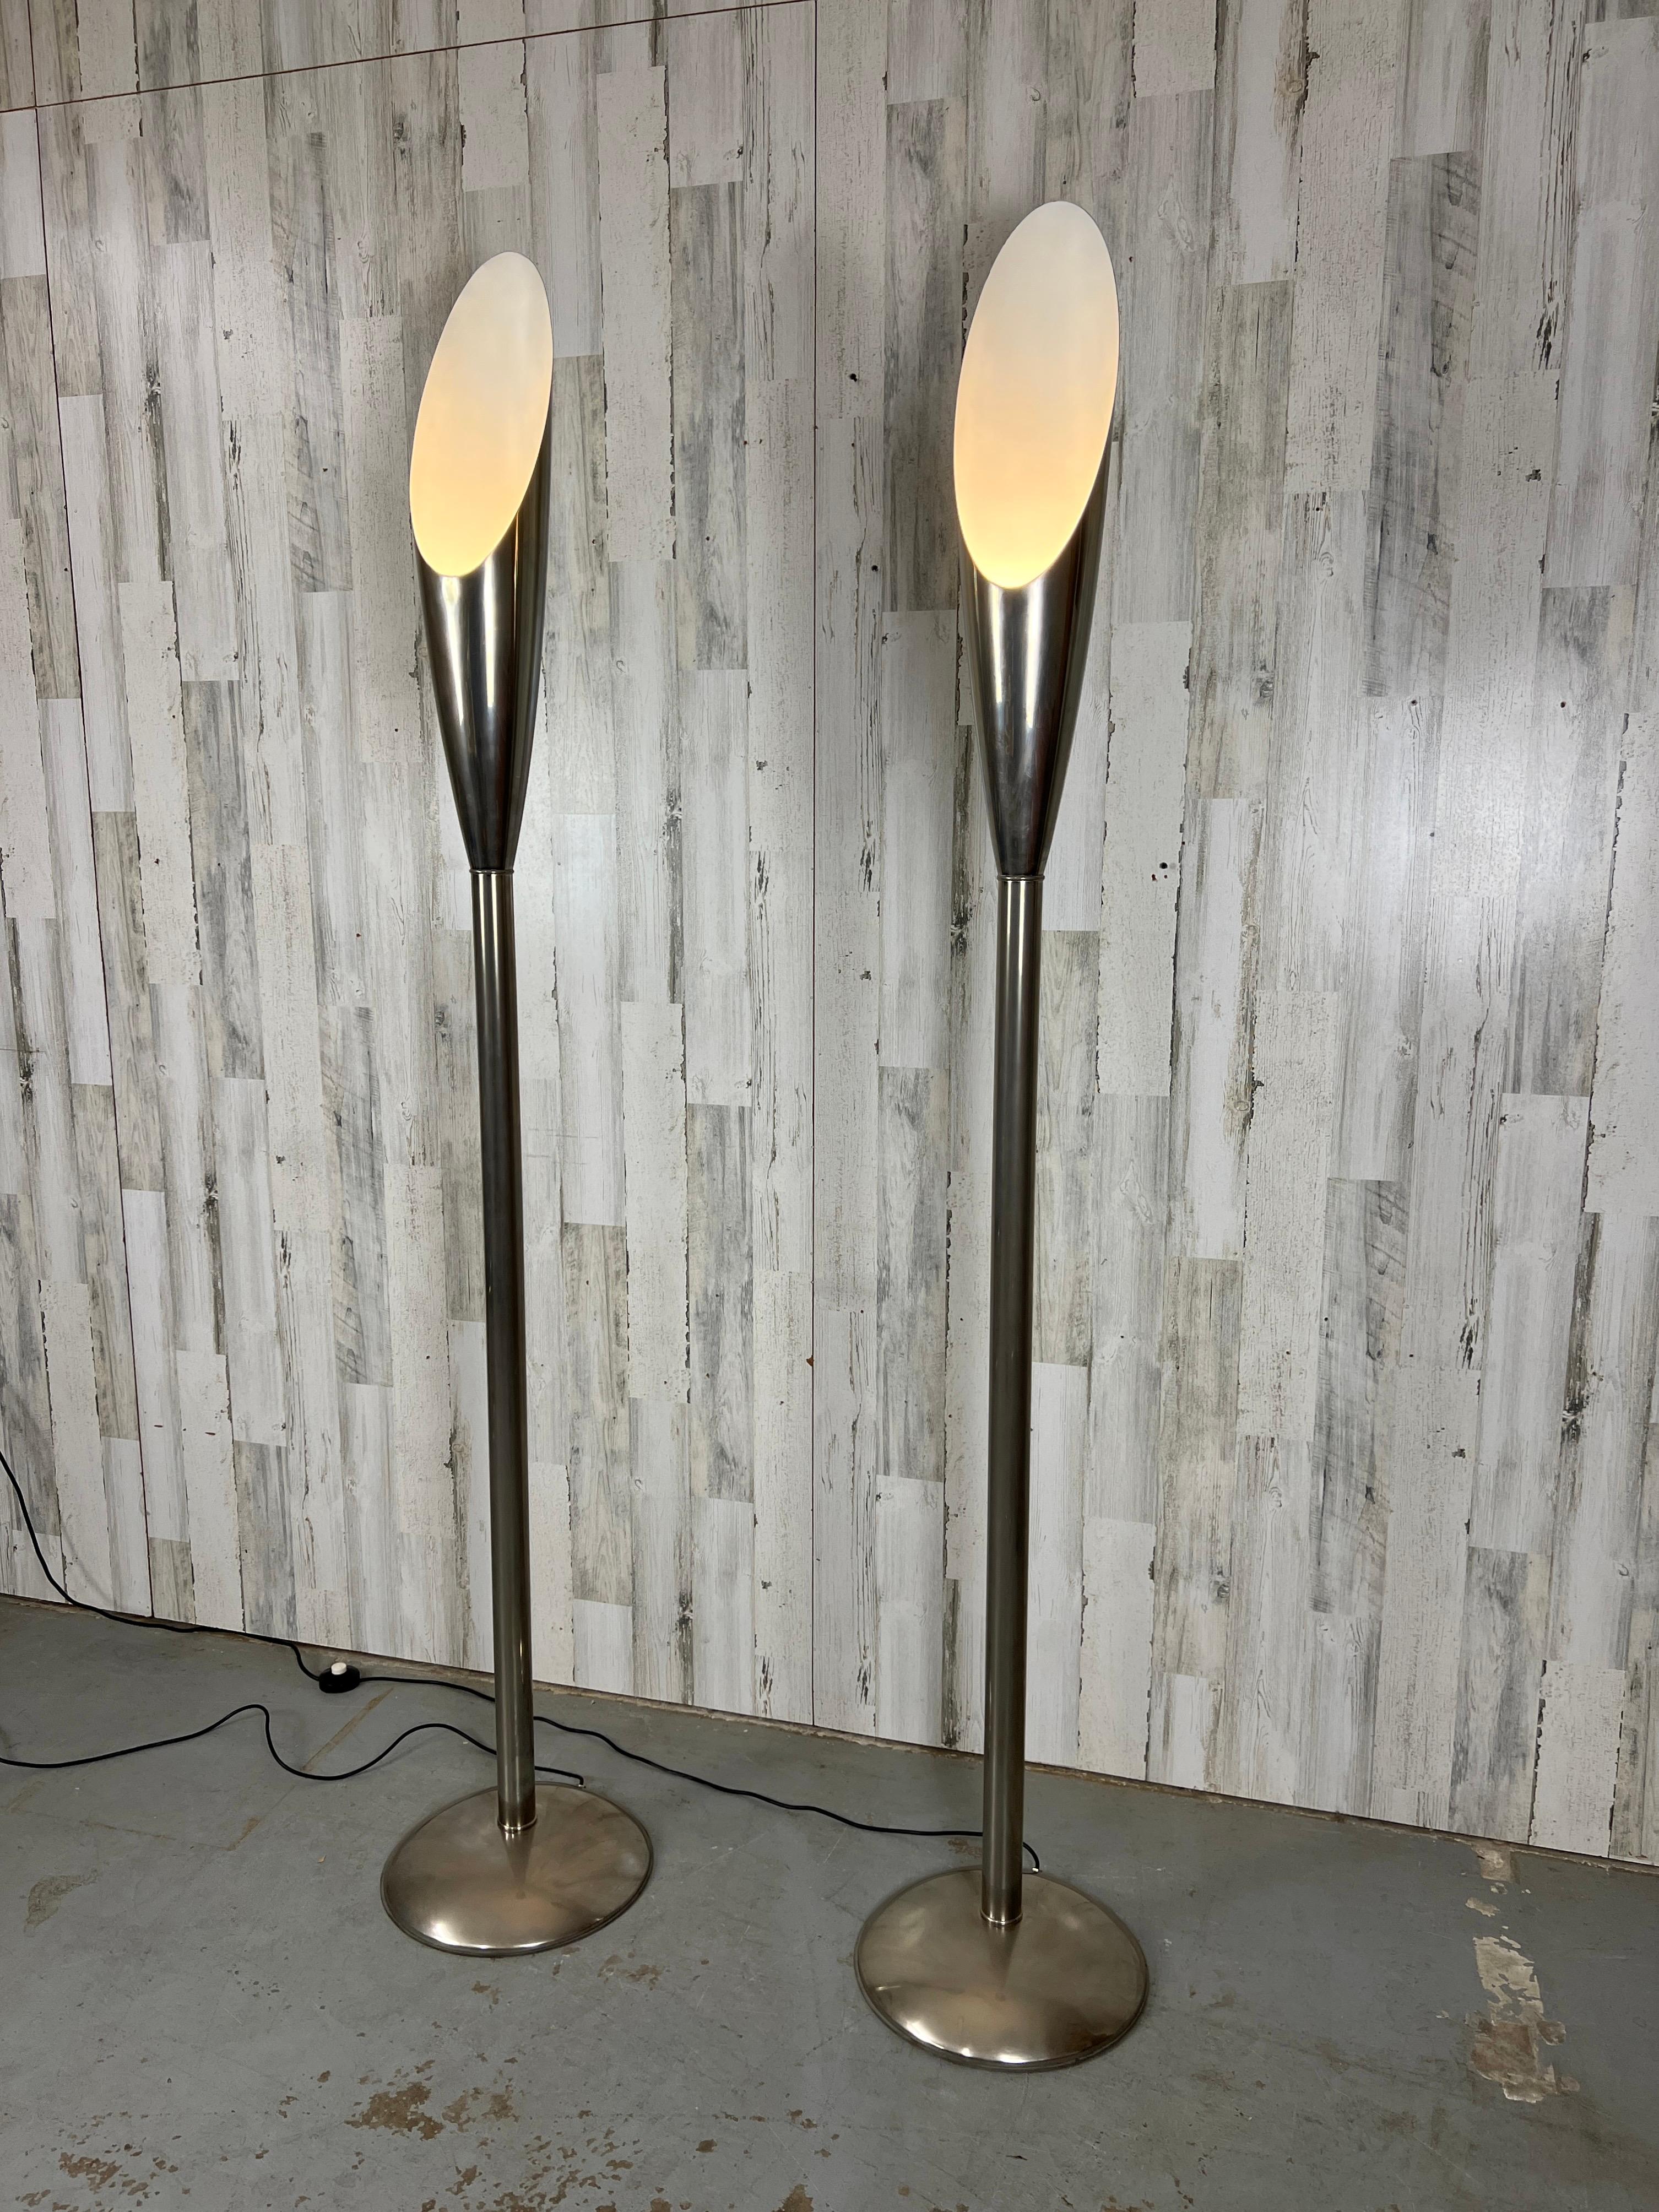 Modernist Aluminum Torchère Floor Lamps In Good Condition For Sale In Denton, TX